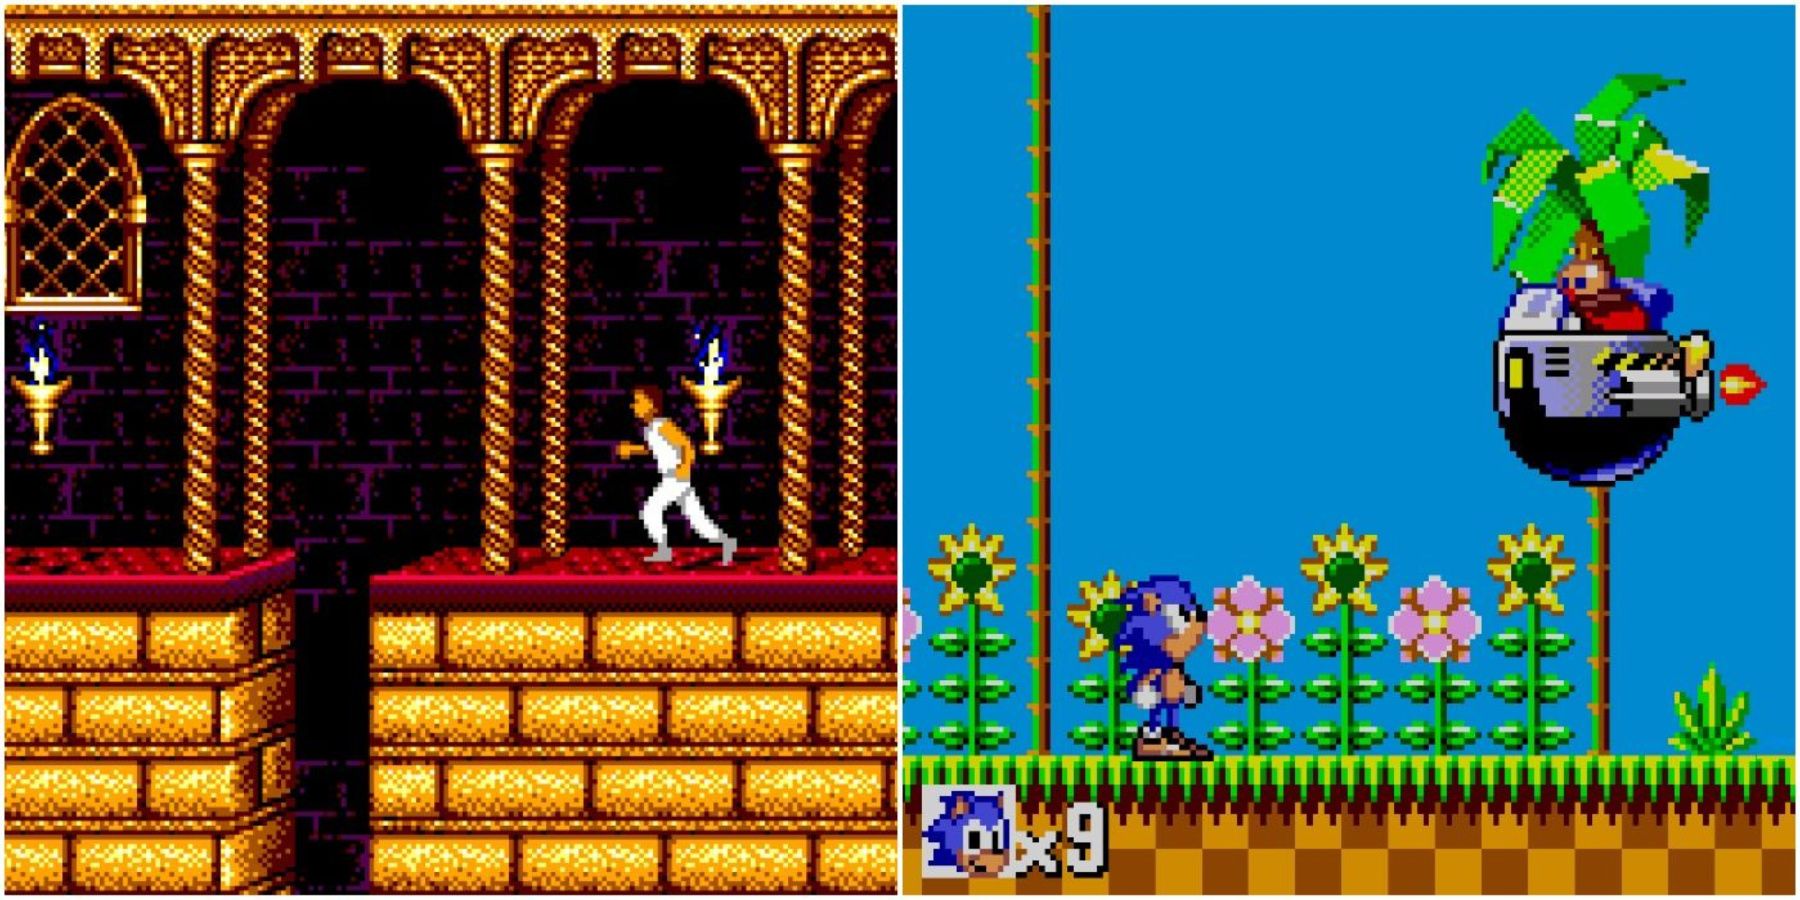 12 best Master System games, from Sonic to Out Run